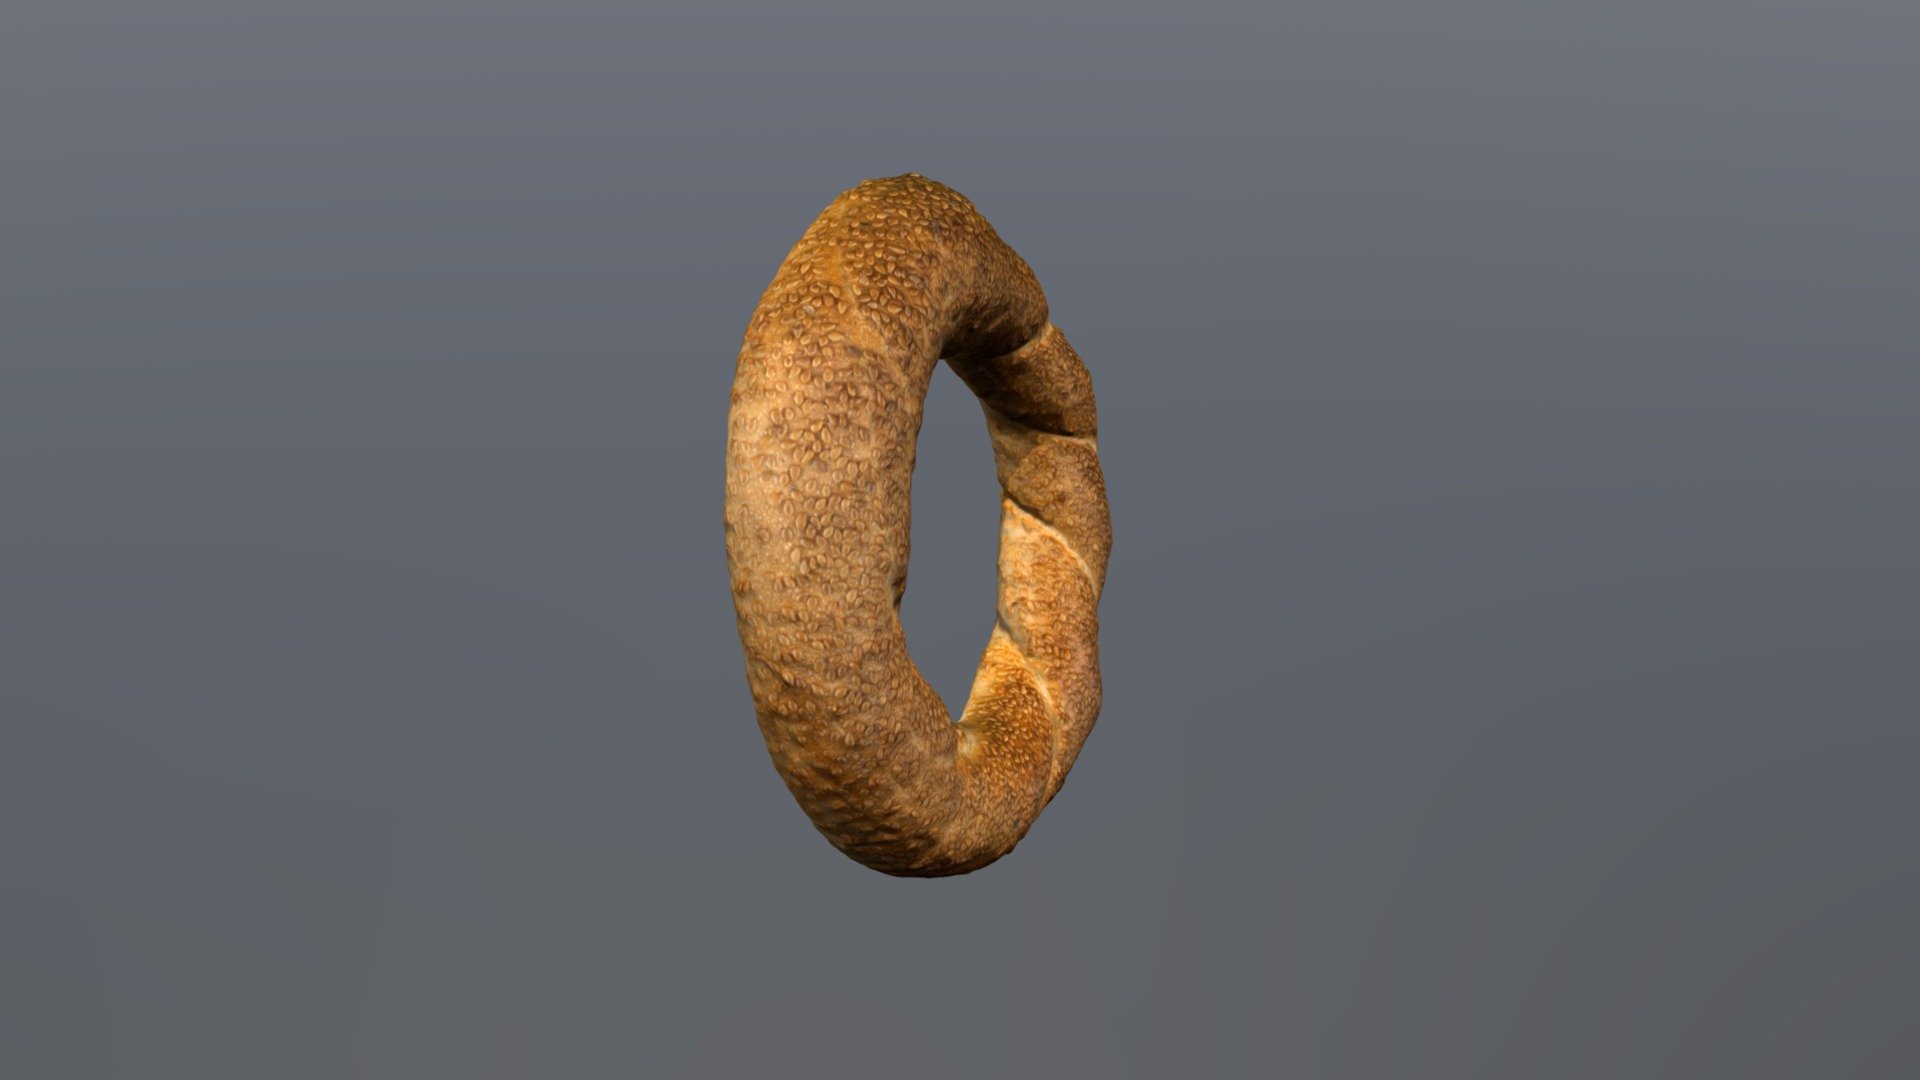 3d Simit(Turkish badget) which is scanned and used for lenticular project
https://www.linkedin.com/feed/update/urn:li:activity:6442867175152848896 - Simit - 3D model by 3dimge 3d model